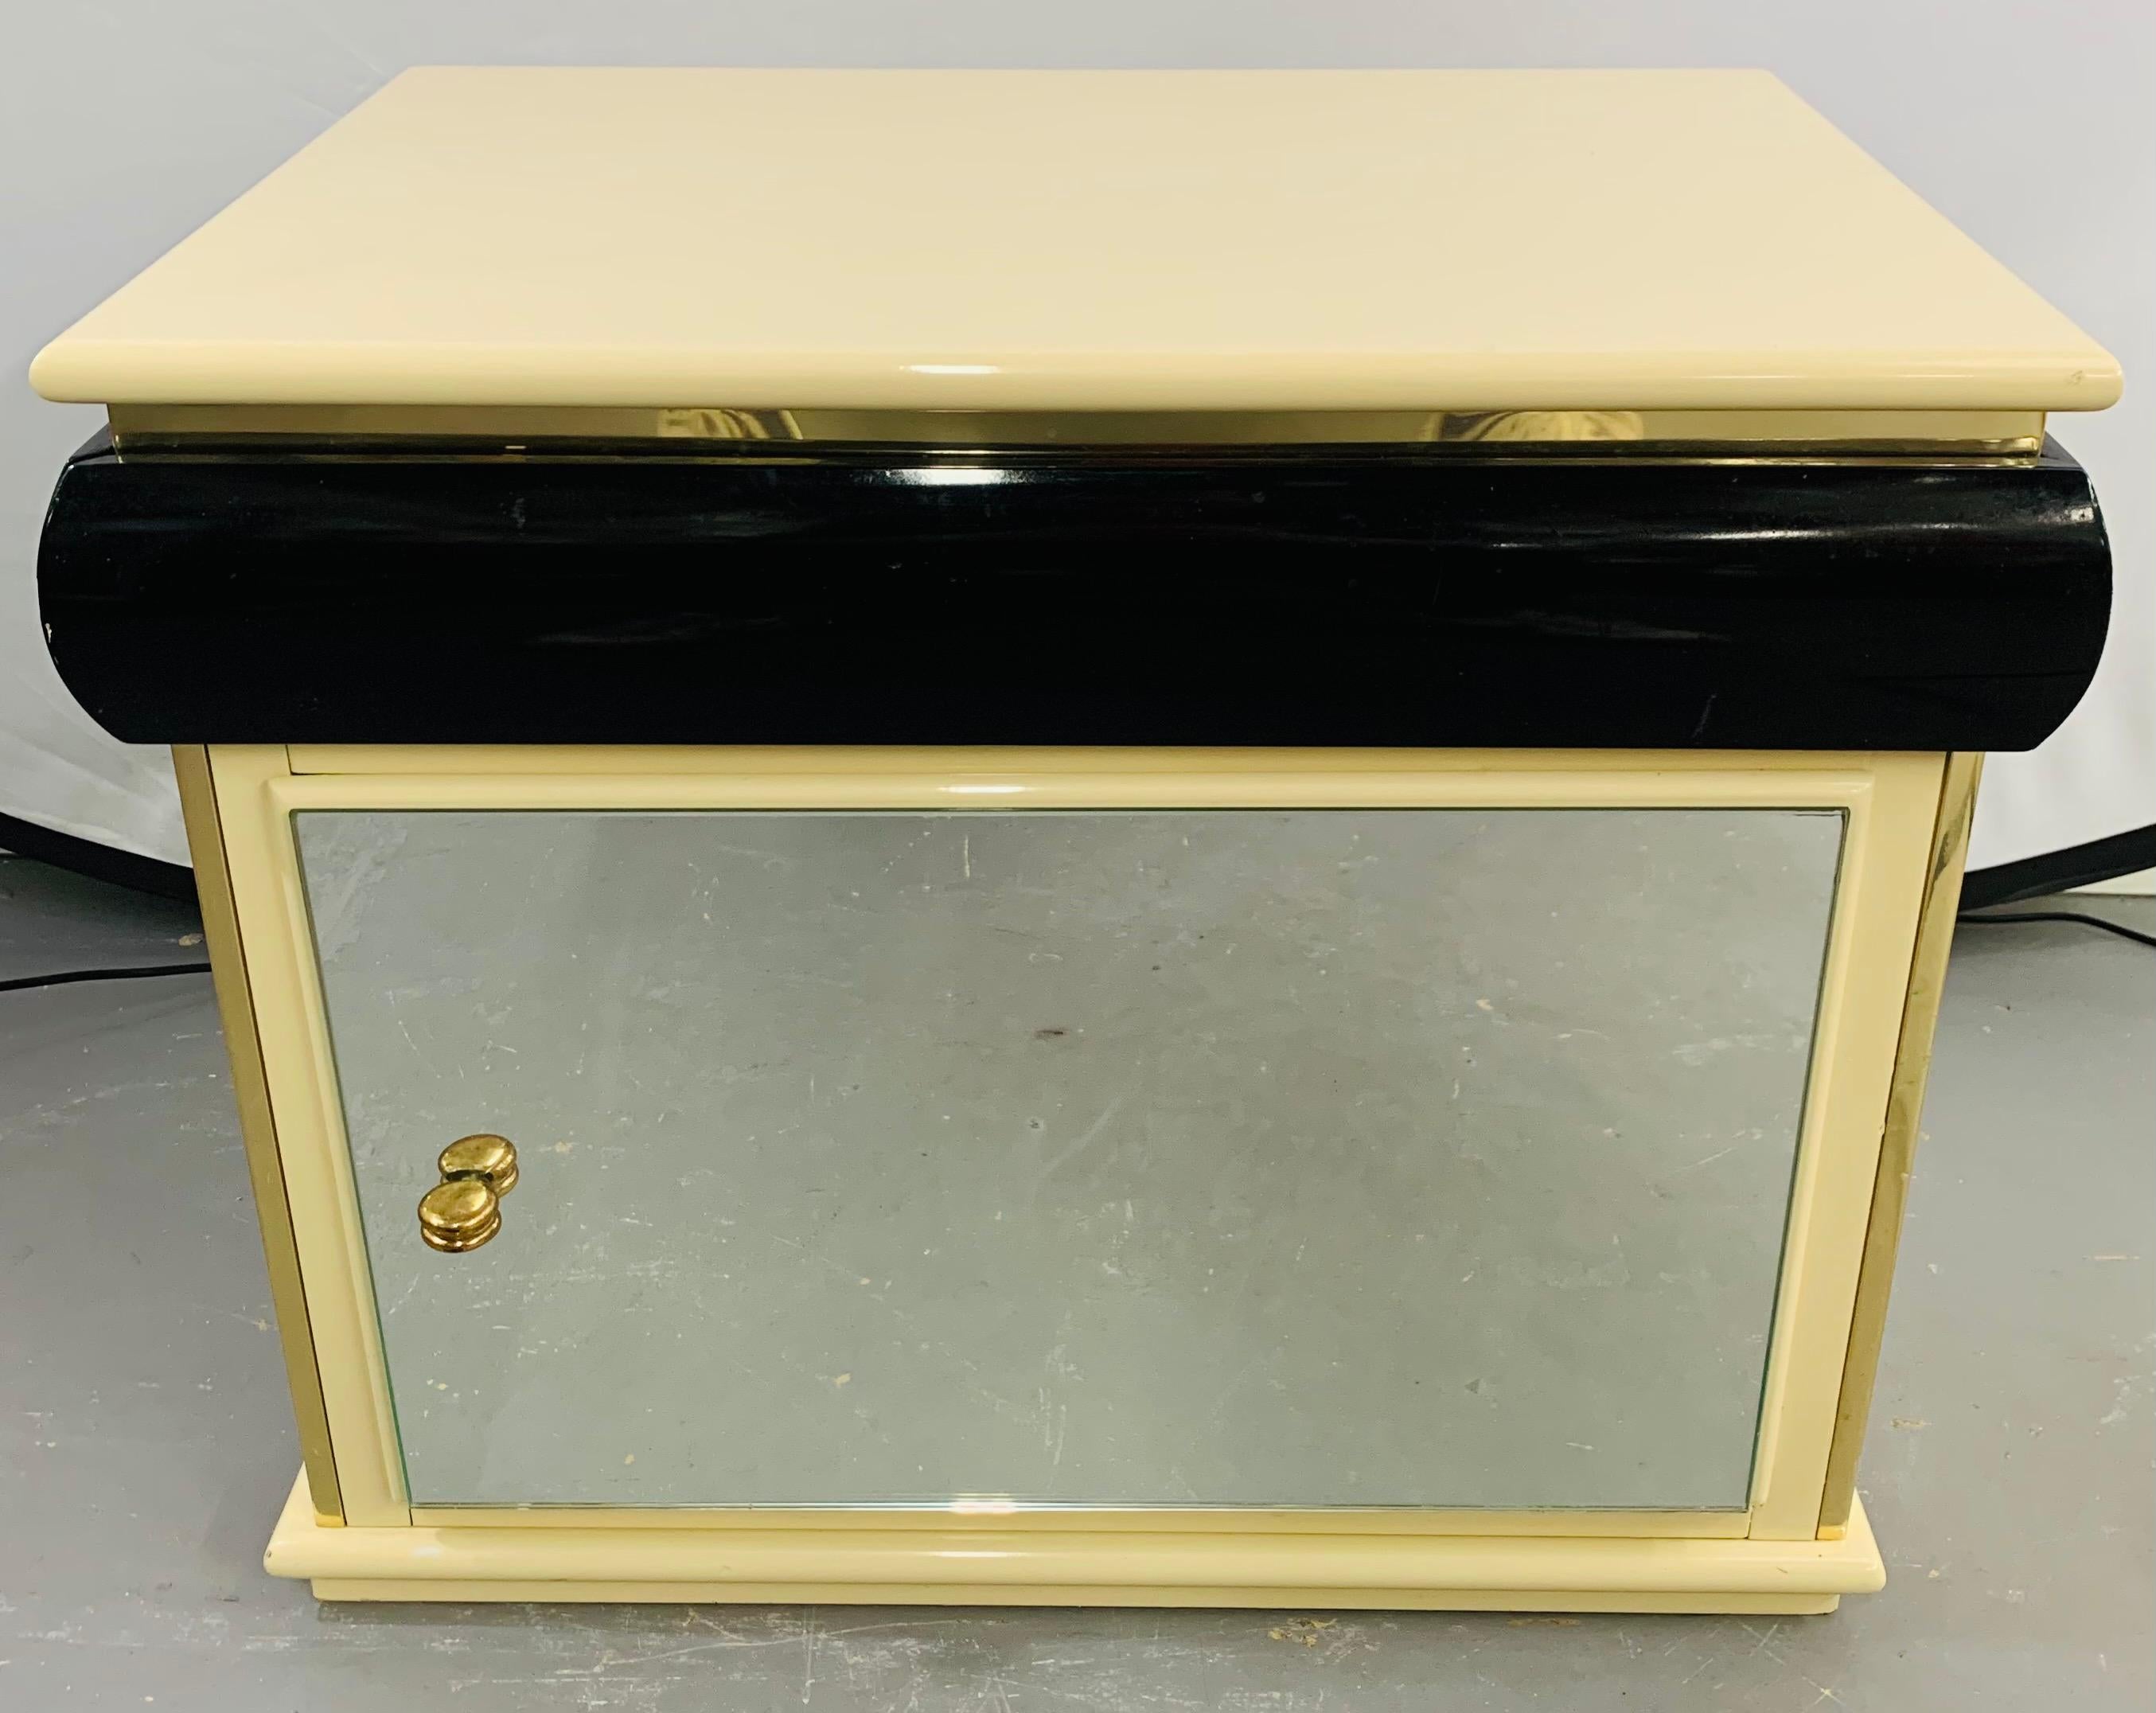 A timeless pair of Art Deco lacquered off-white and black nightstands or side tables with brass frames and original brass knobs. The doors are mirrored which makes this pair of nightstands very stylish. 

Some scratches to the surface but overall